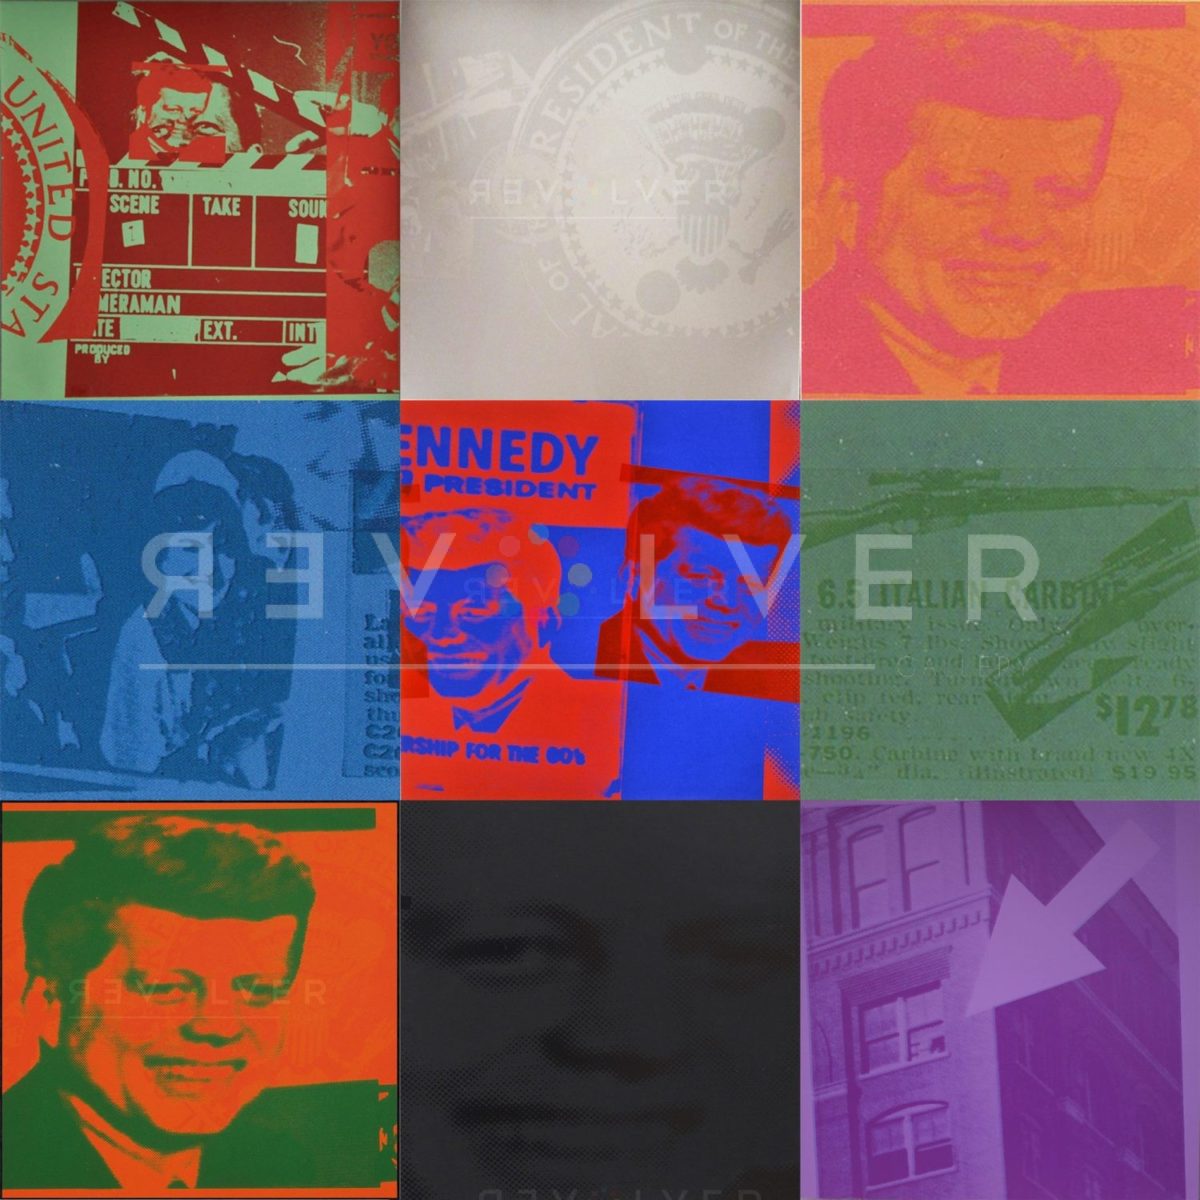 Nine prints from Andy Warhol's Flash series in a 3x3 grid previewing the full series.